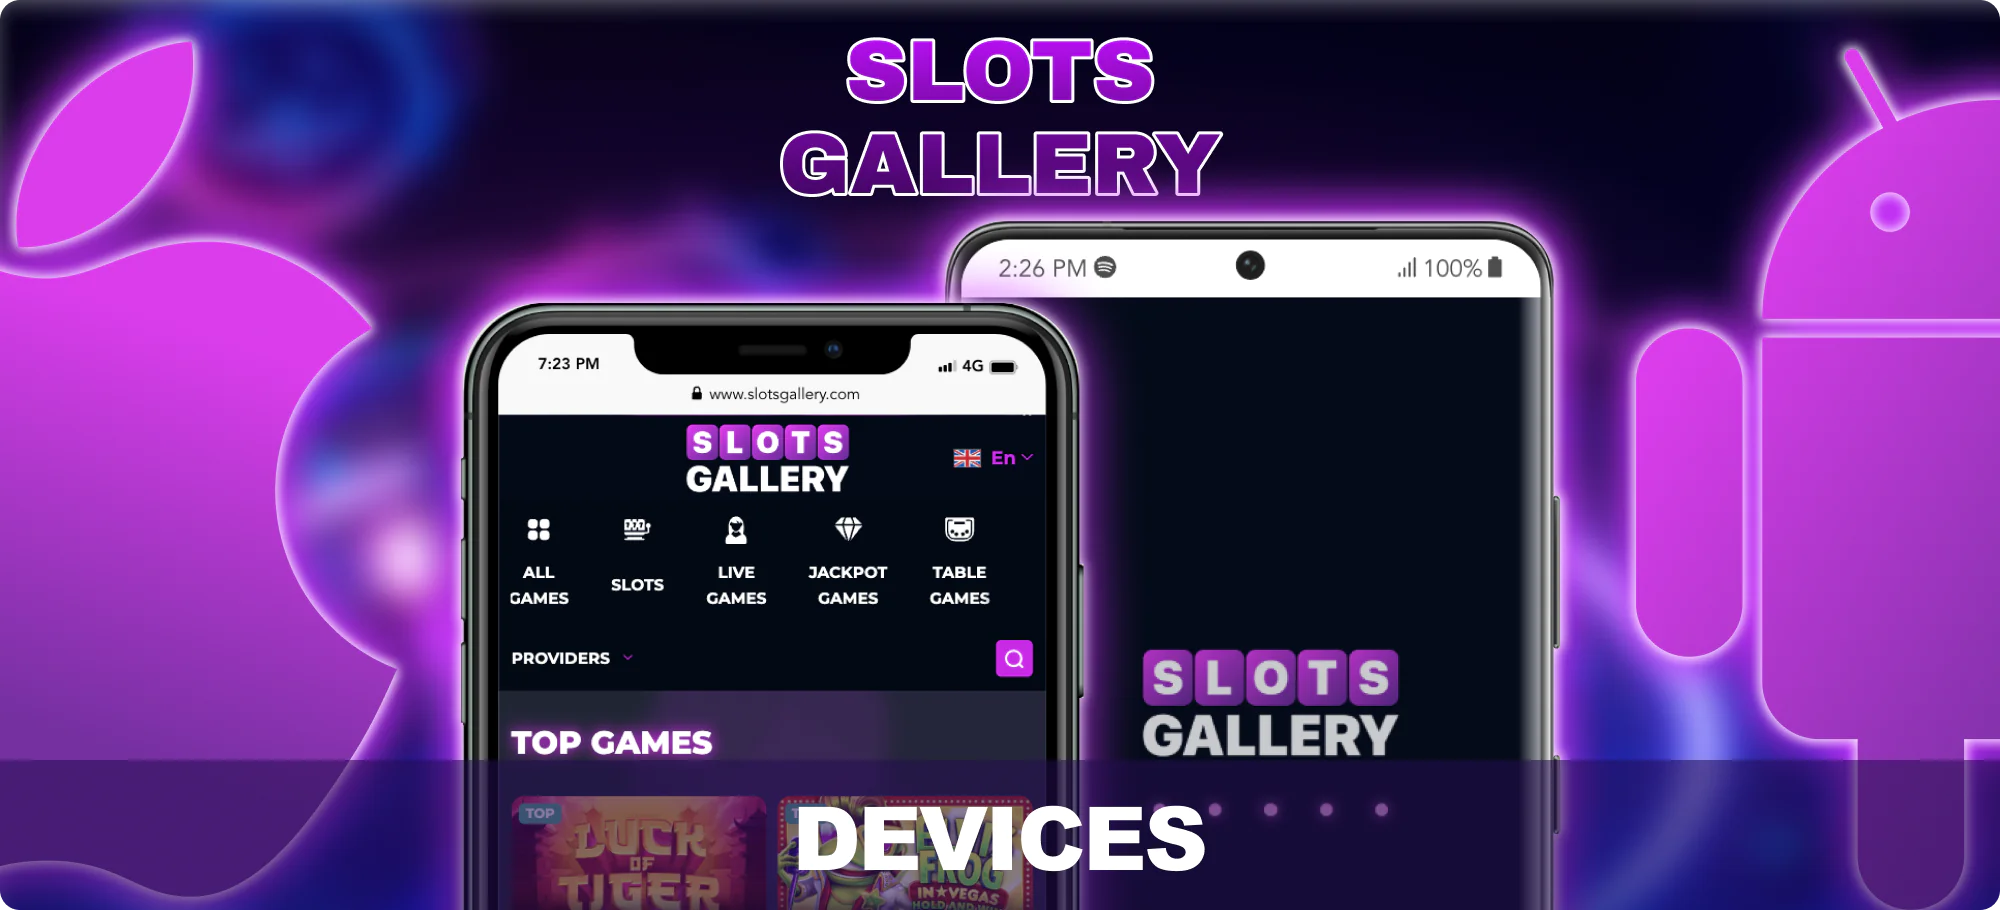 What Devices players can use to Play at Slots Gallery